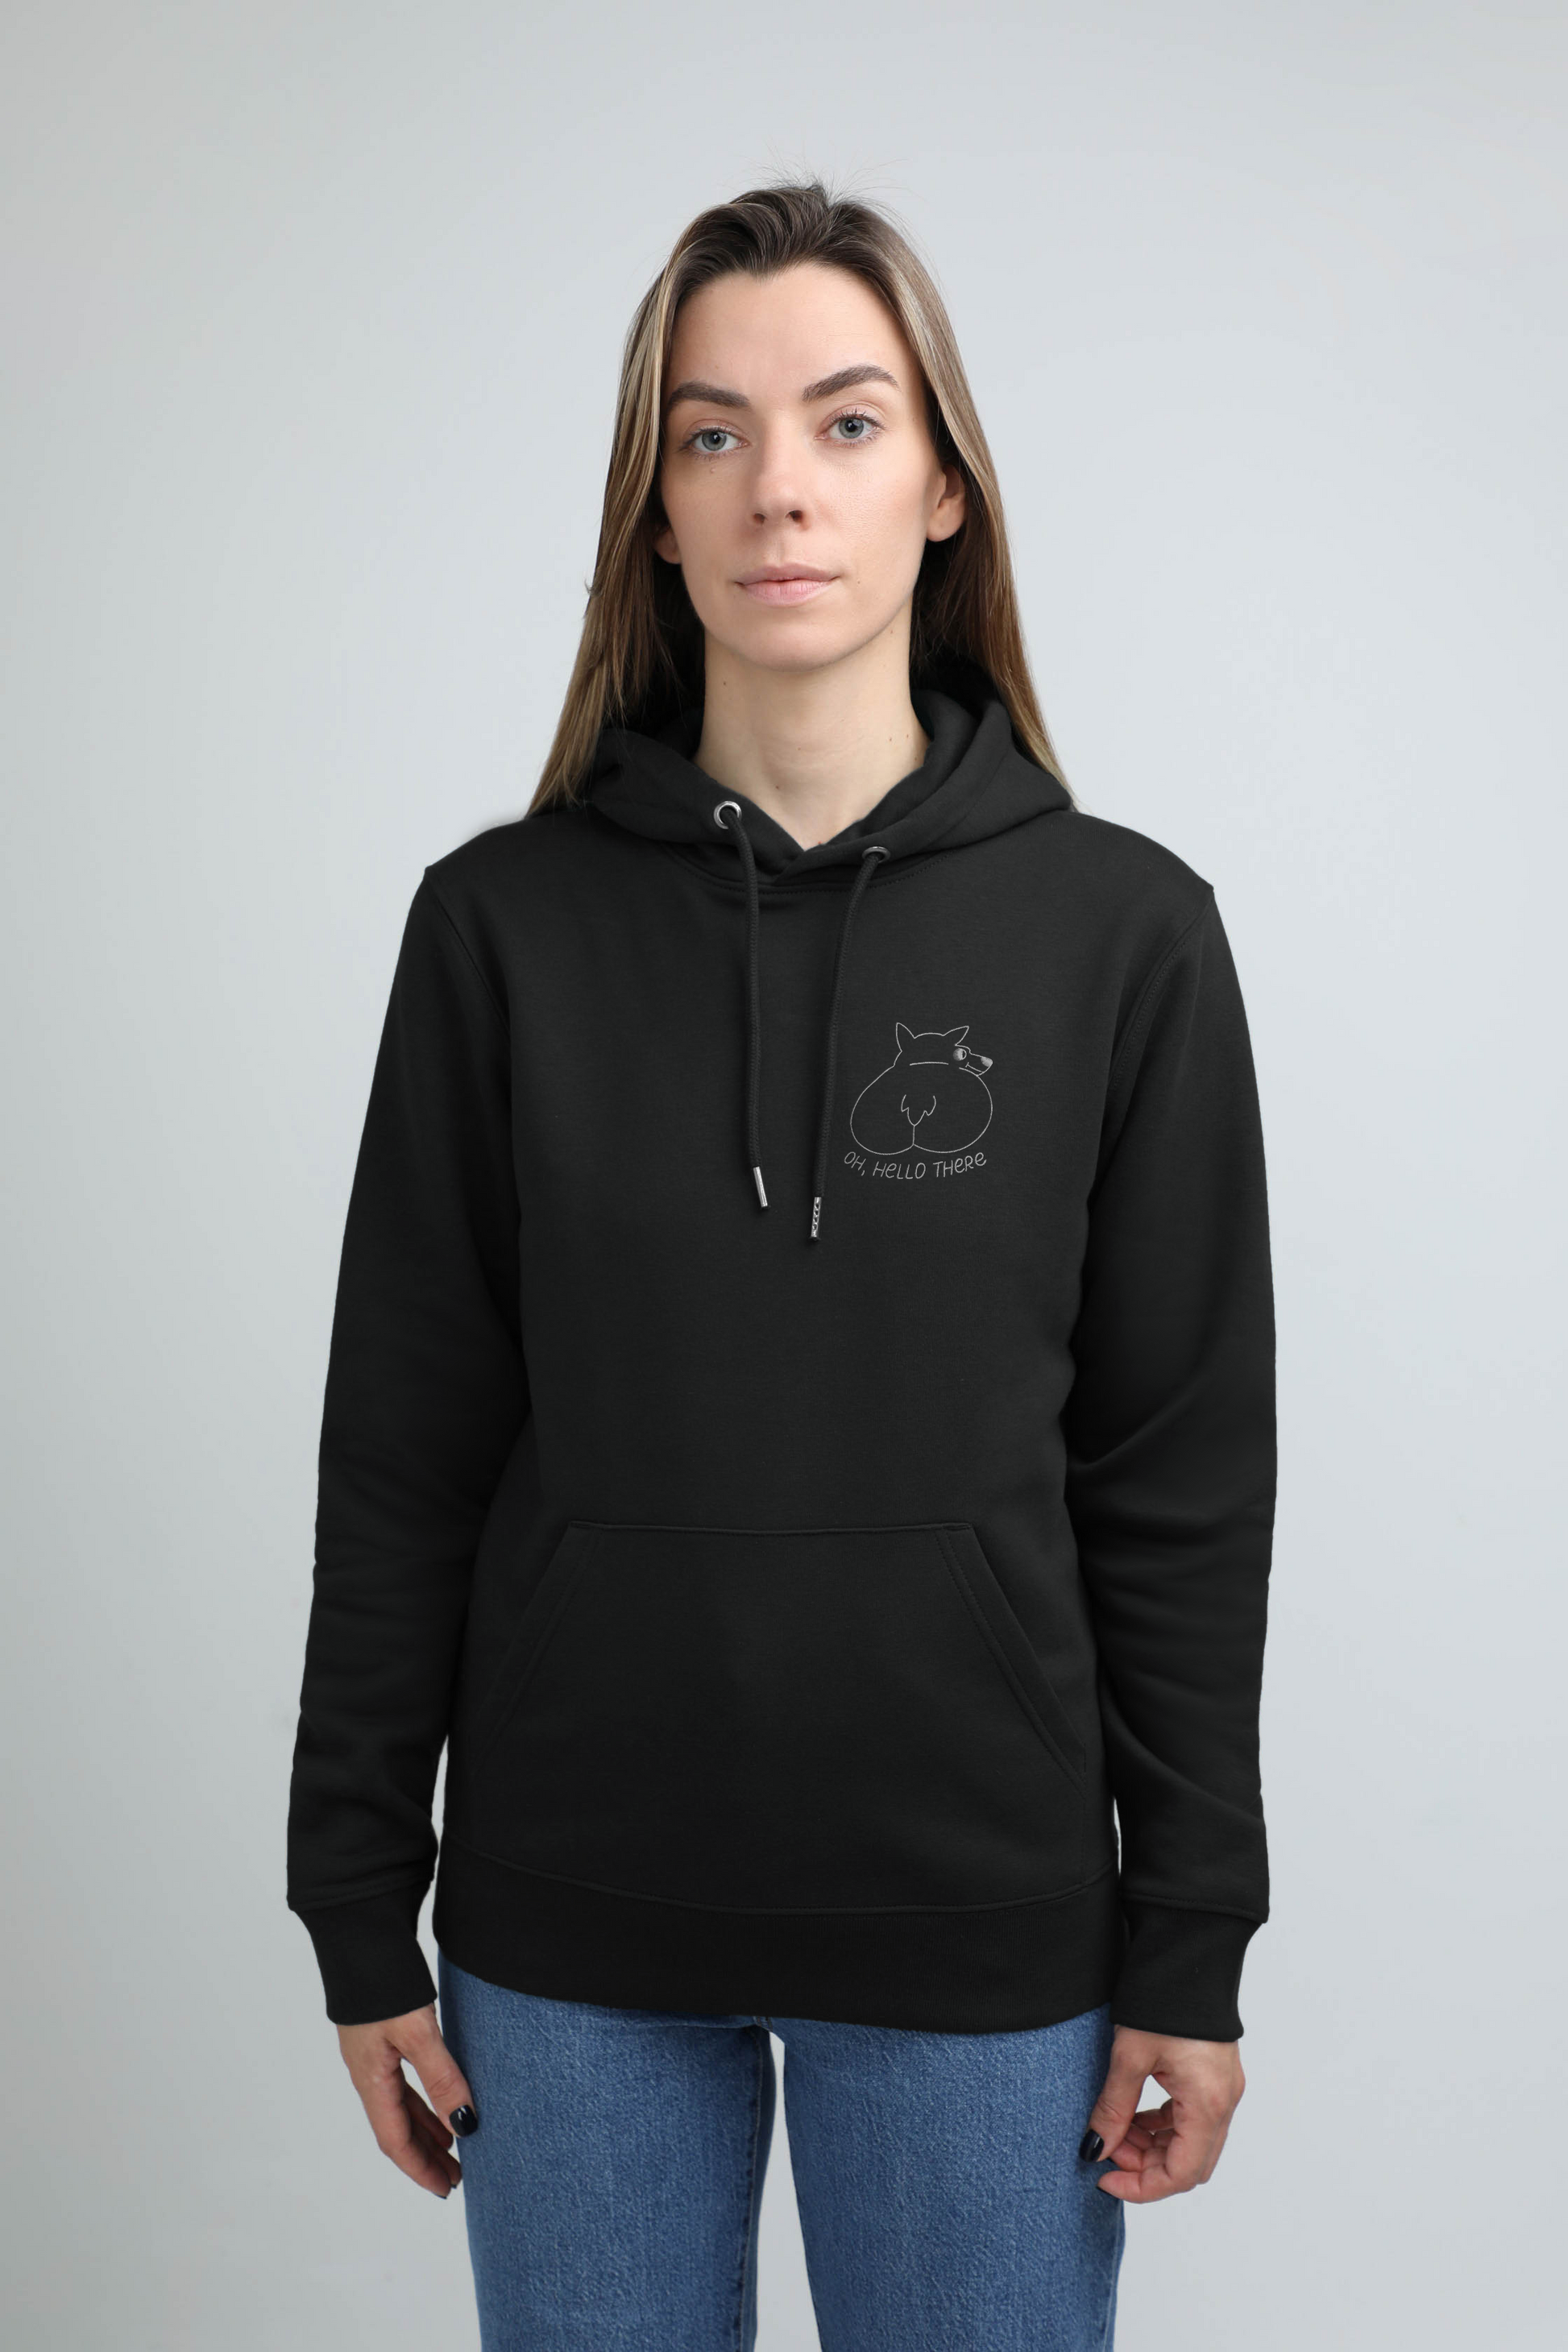 Oh, hello there! | Hoodie with embroidered dog. Regular fit | Unisex - premium dog goods handmade in Europe by animalistus